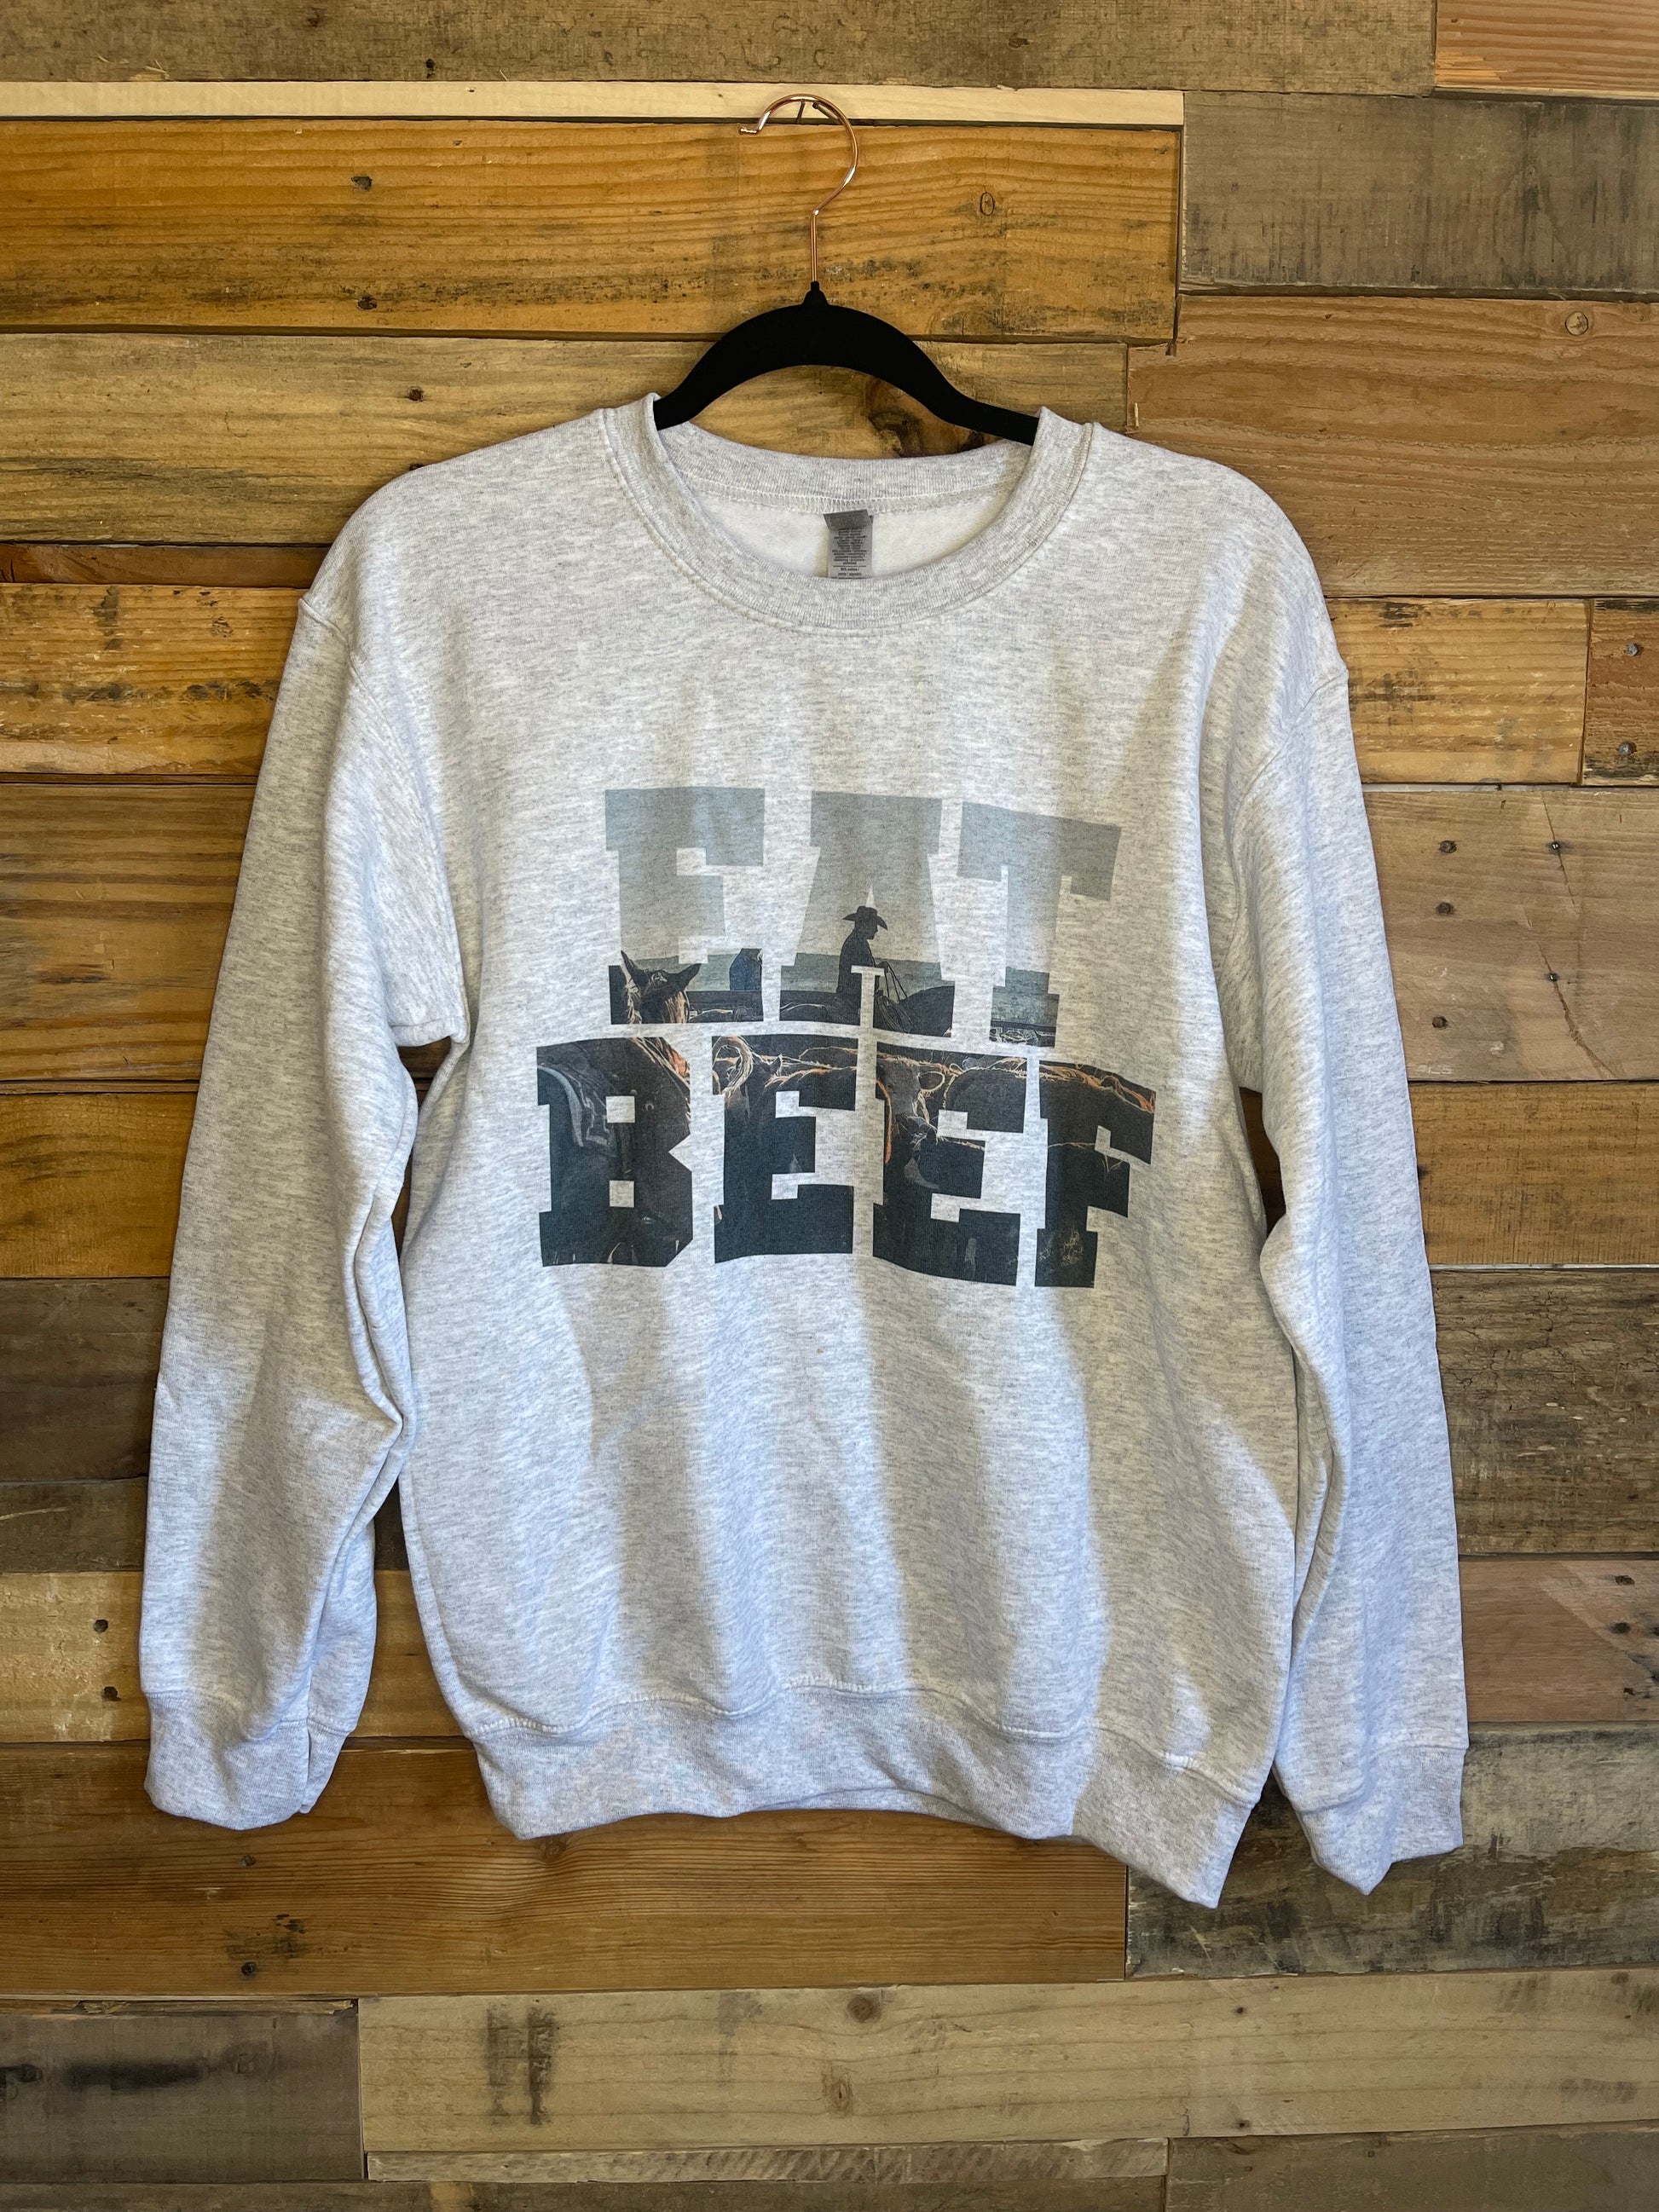 Light grey sweat shirt that says Eat Beef with a cowboy and cow in the letters 